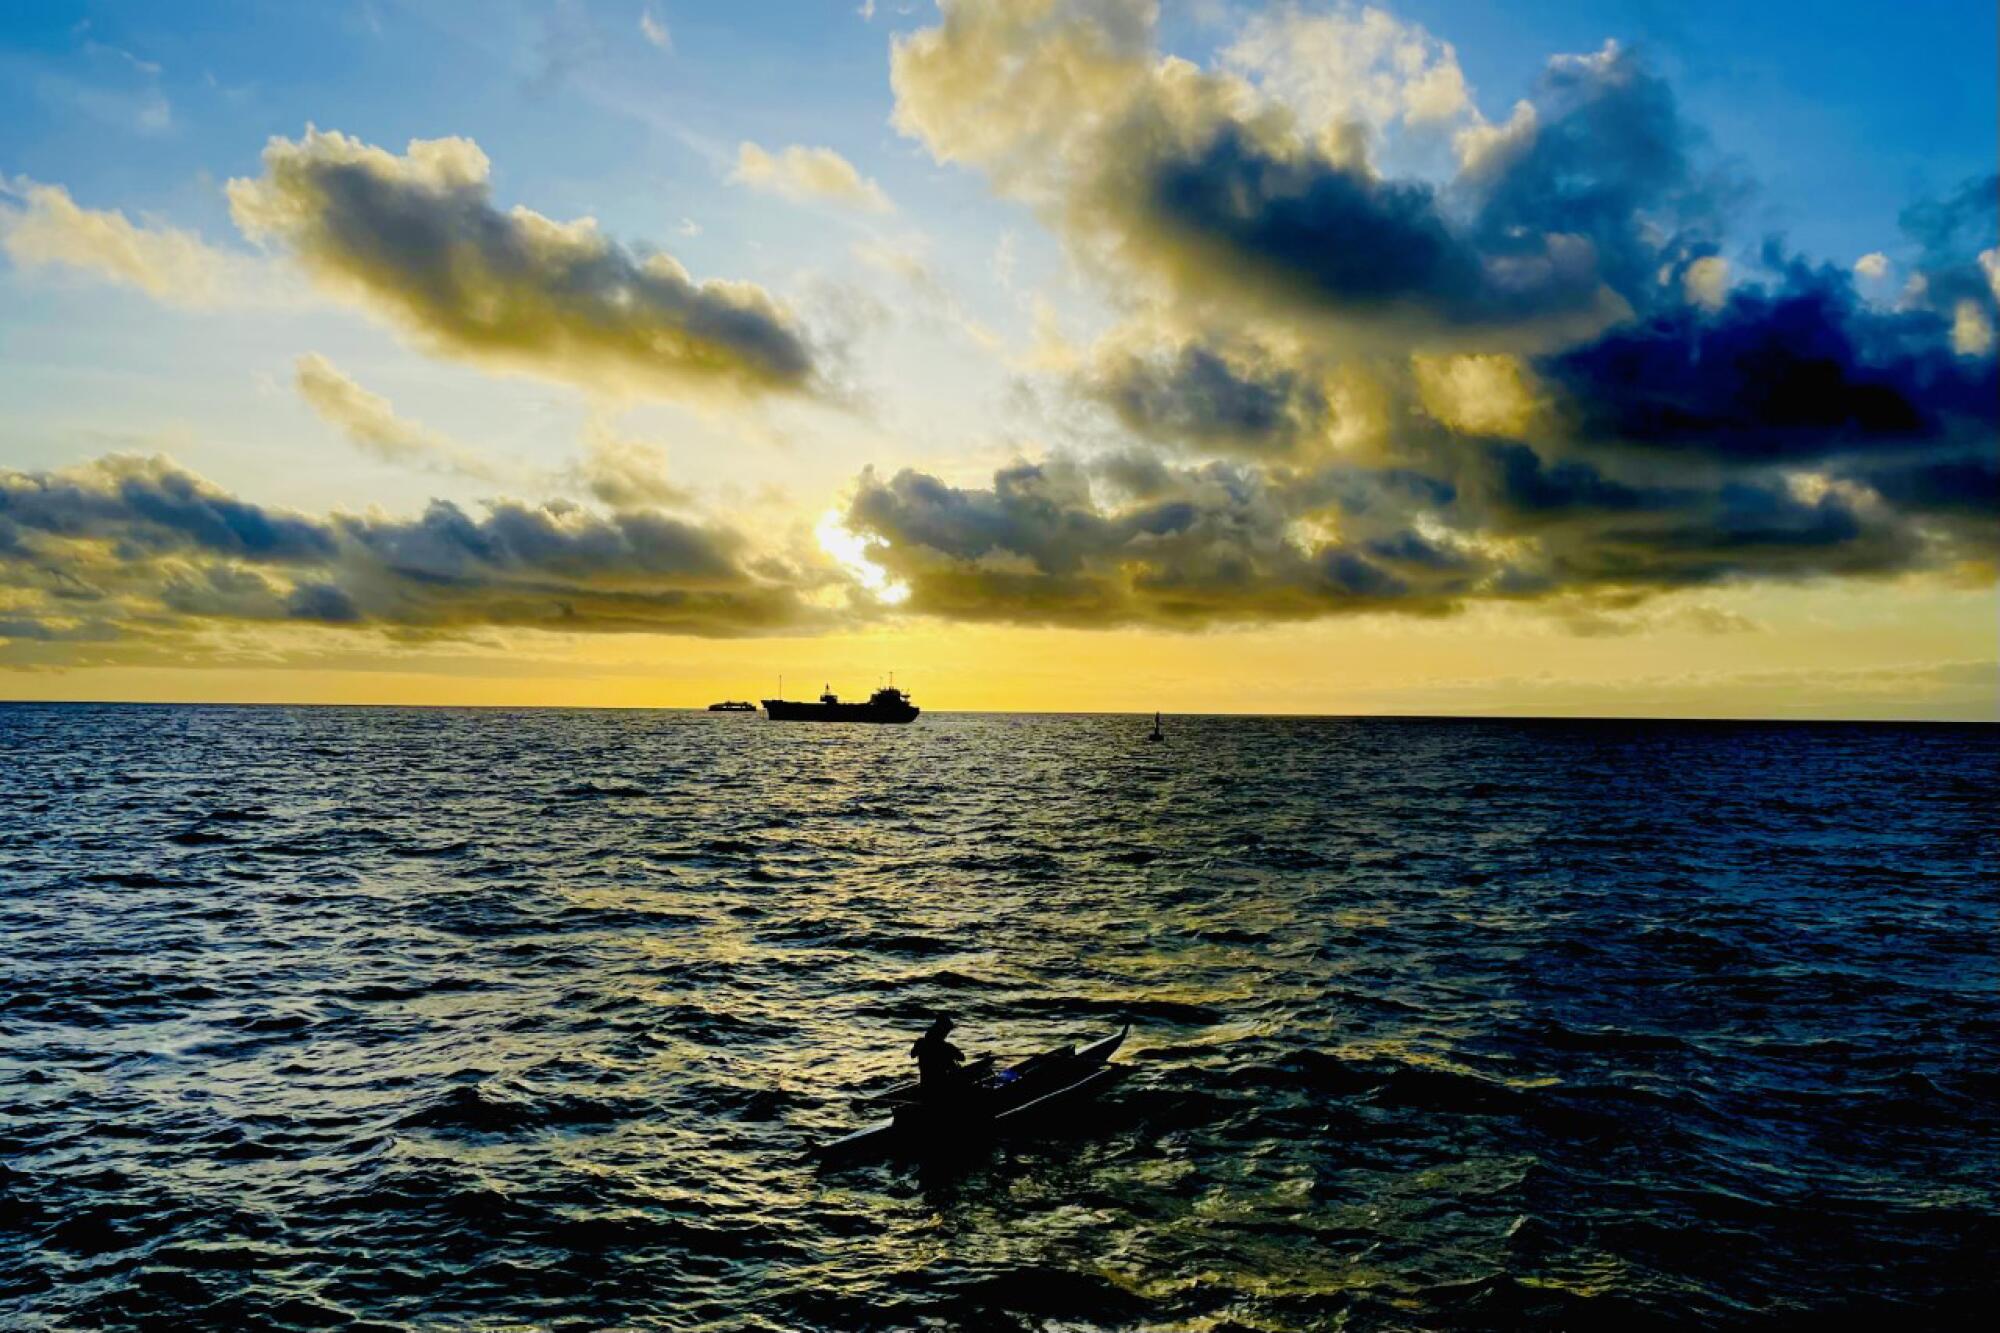 A fisherman navigates an outrigger in the waters off Dumaguete, under large clouds near dusk.